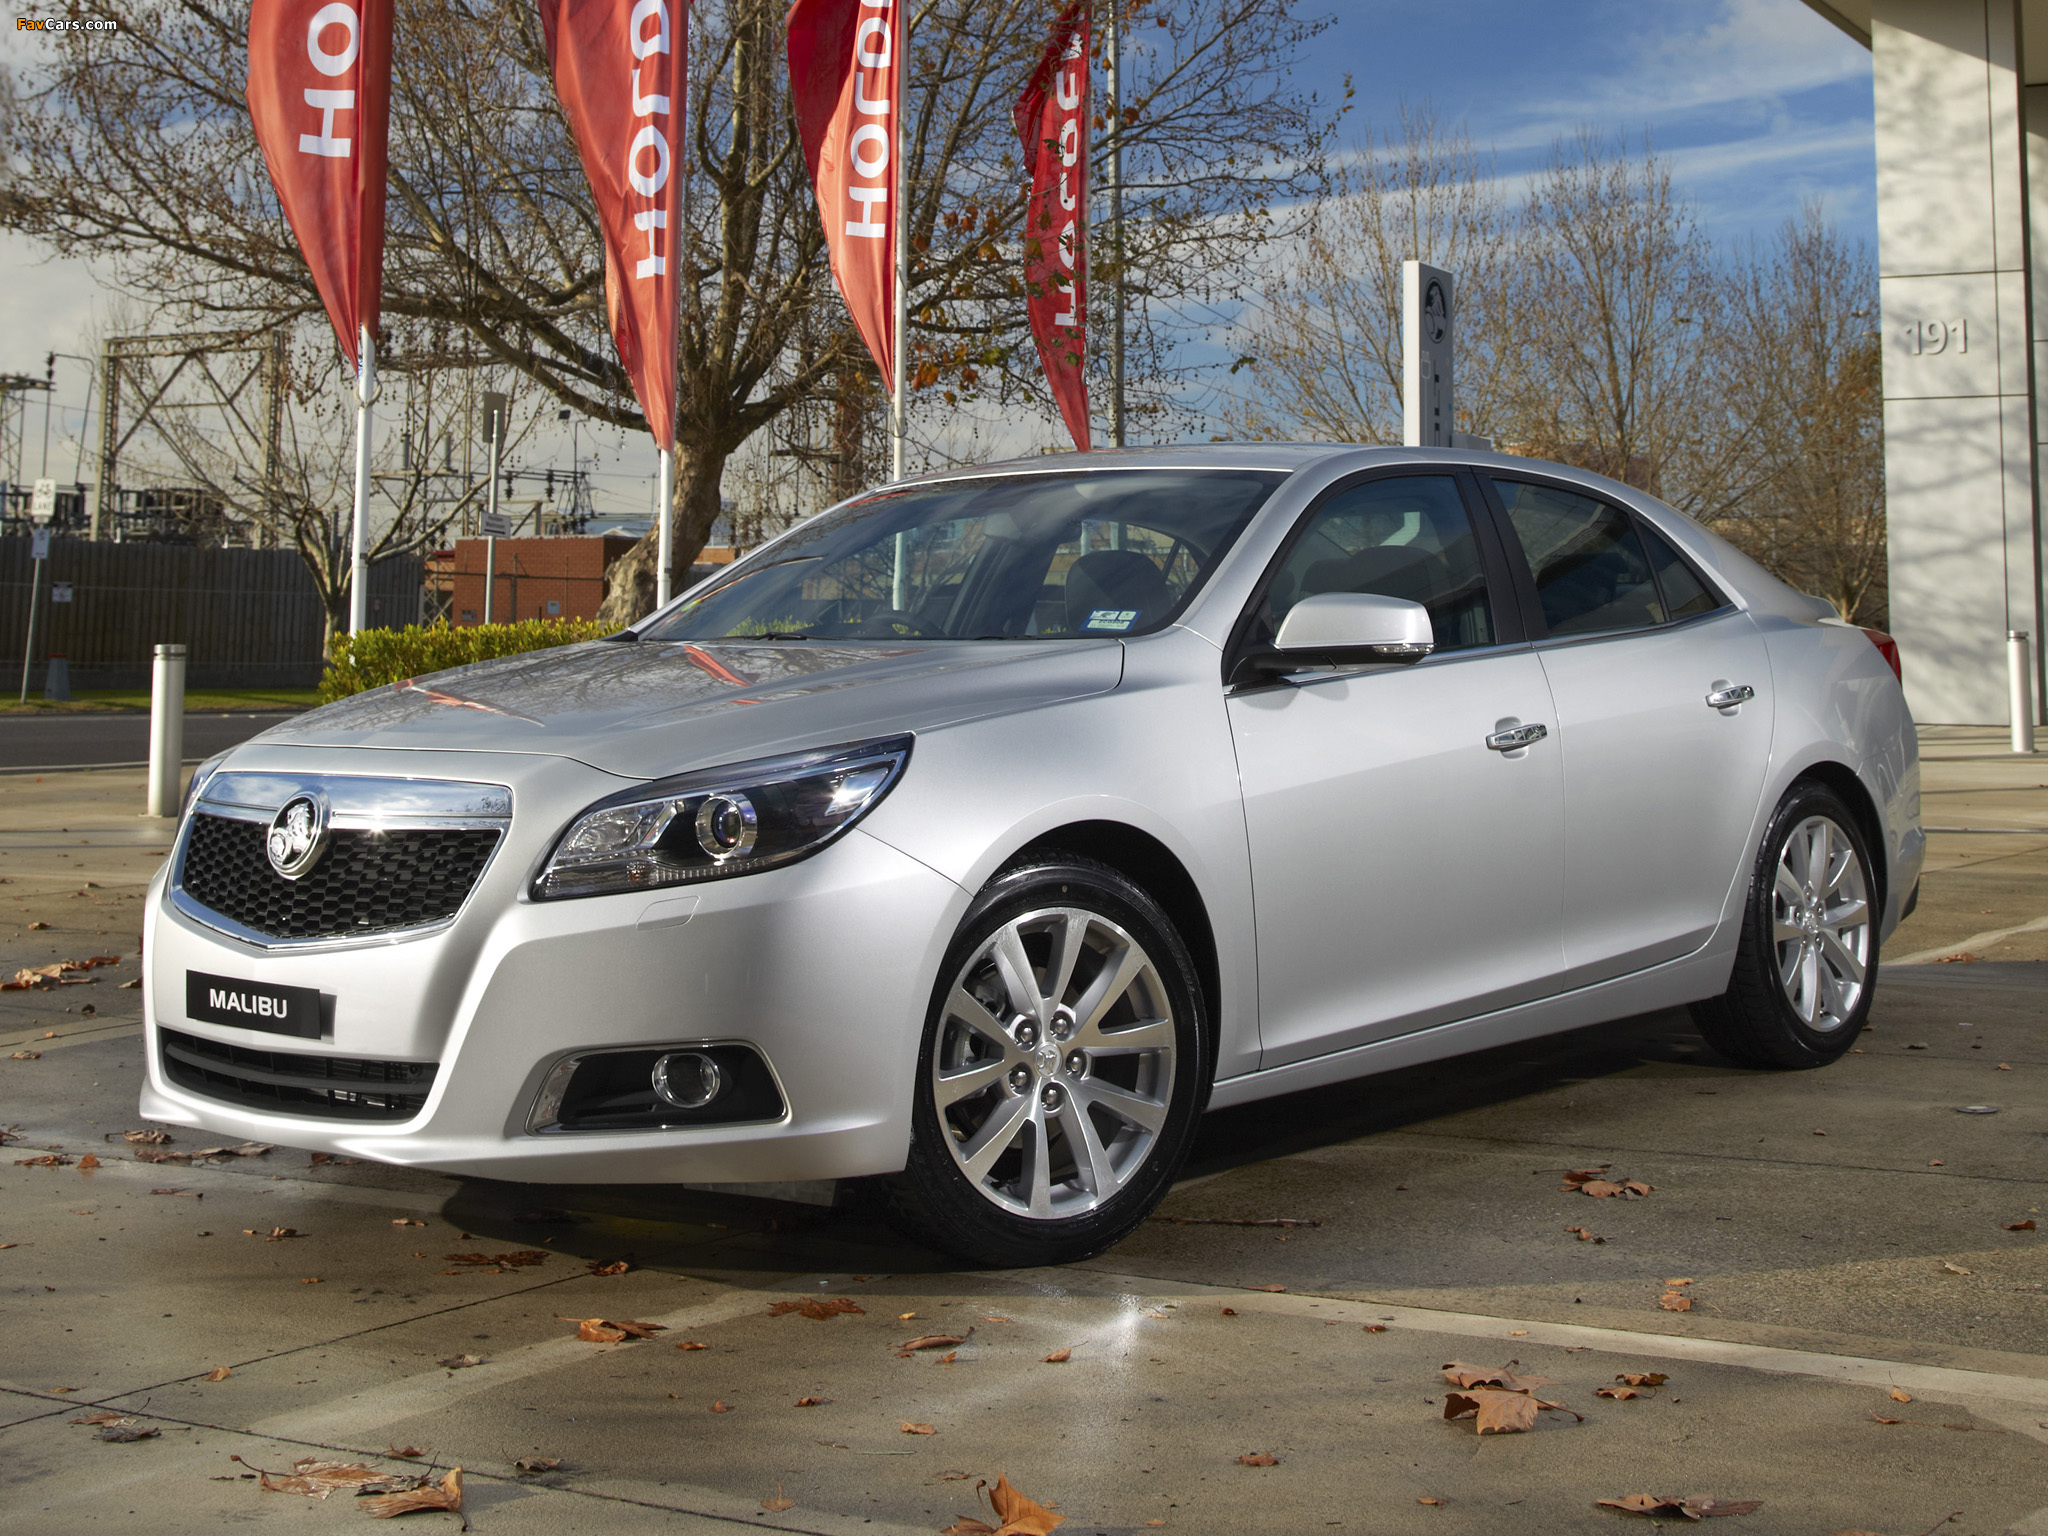 Holden Malibu CDX 2013 pictures (2048 x 1536)